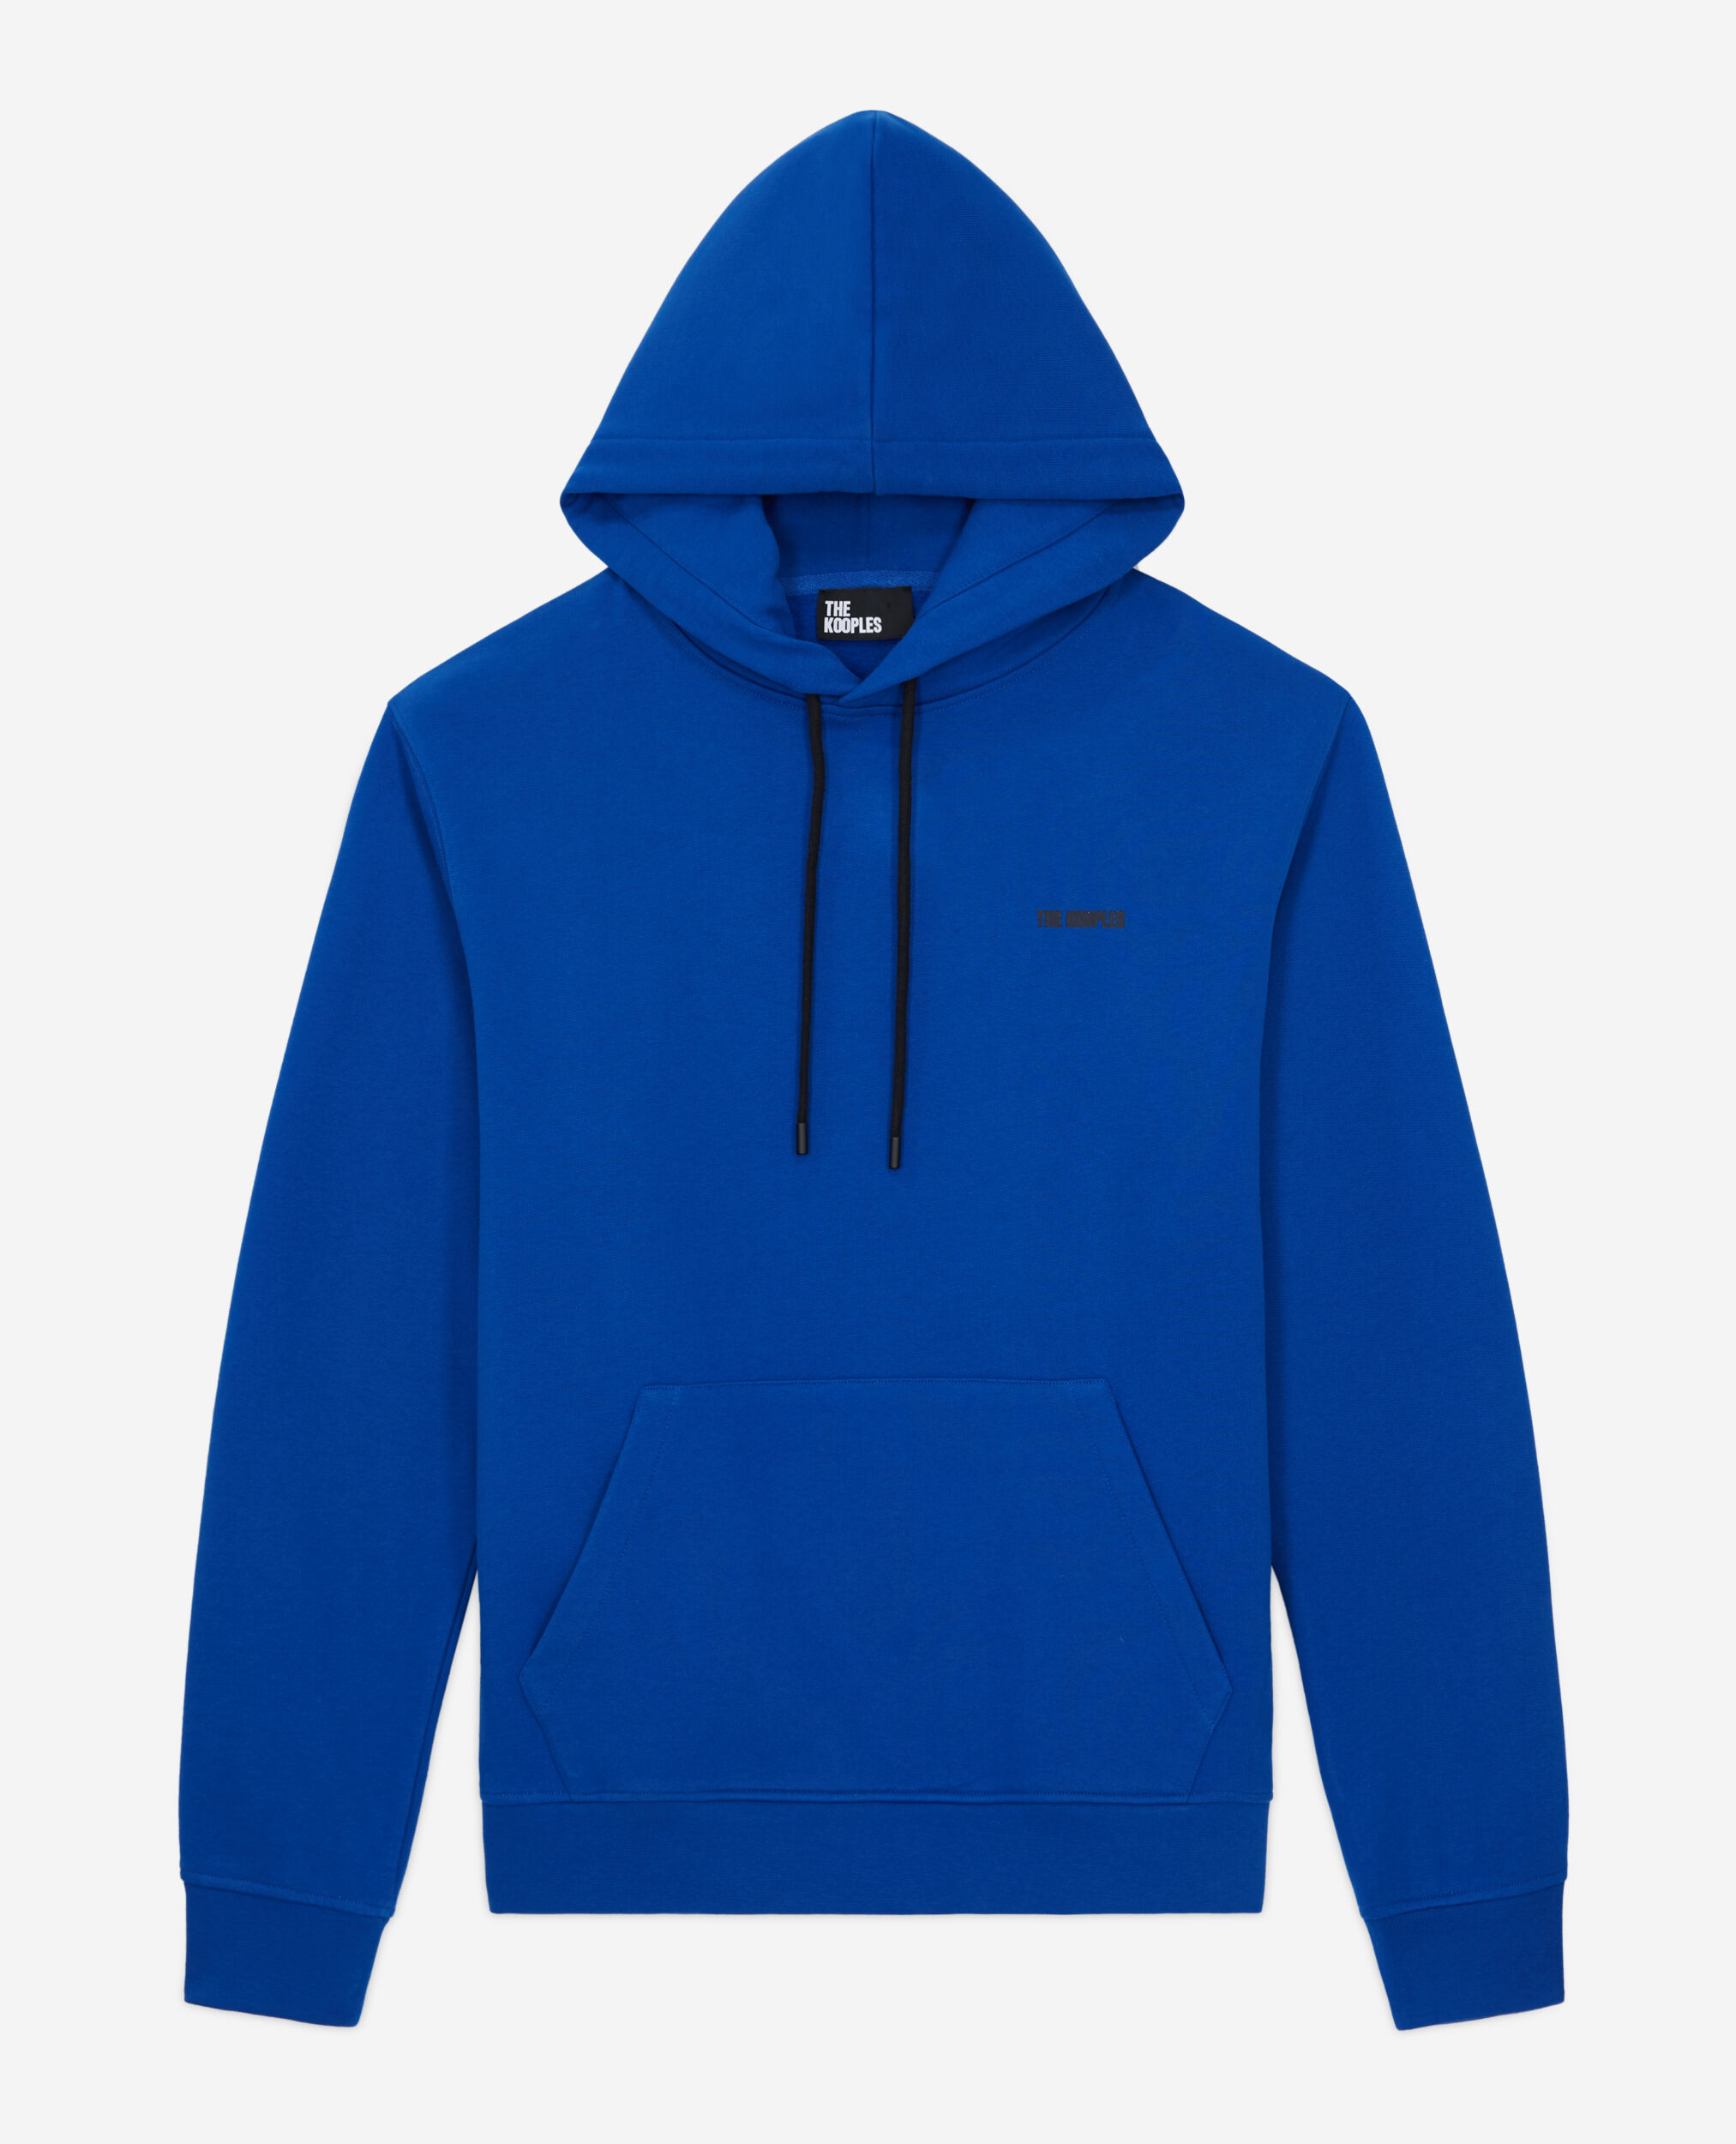 Sudadera logotipo The Kooples azul, BLUE ELECTRIC, hi-res image number null